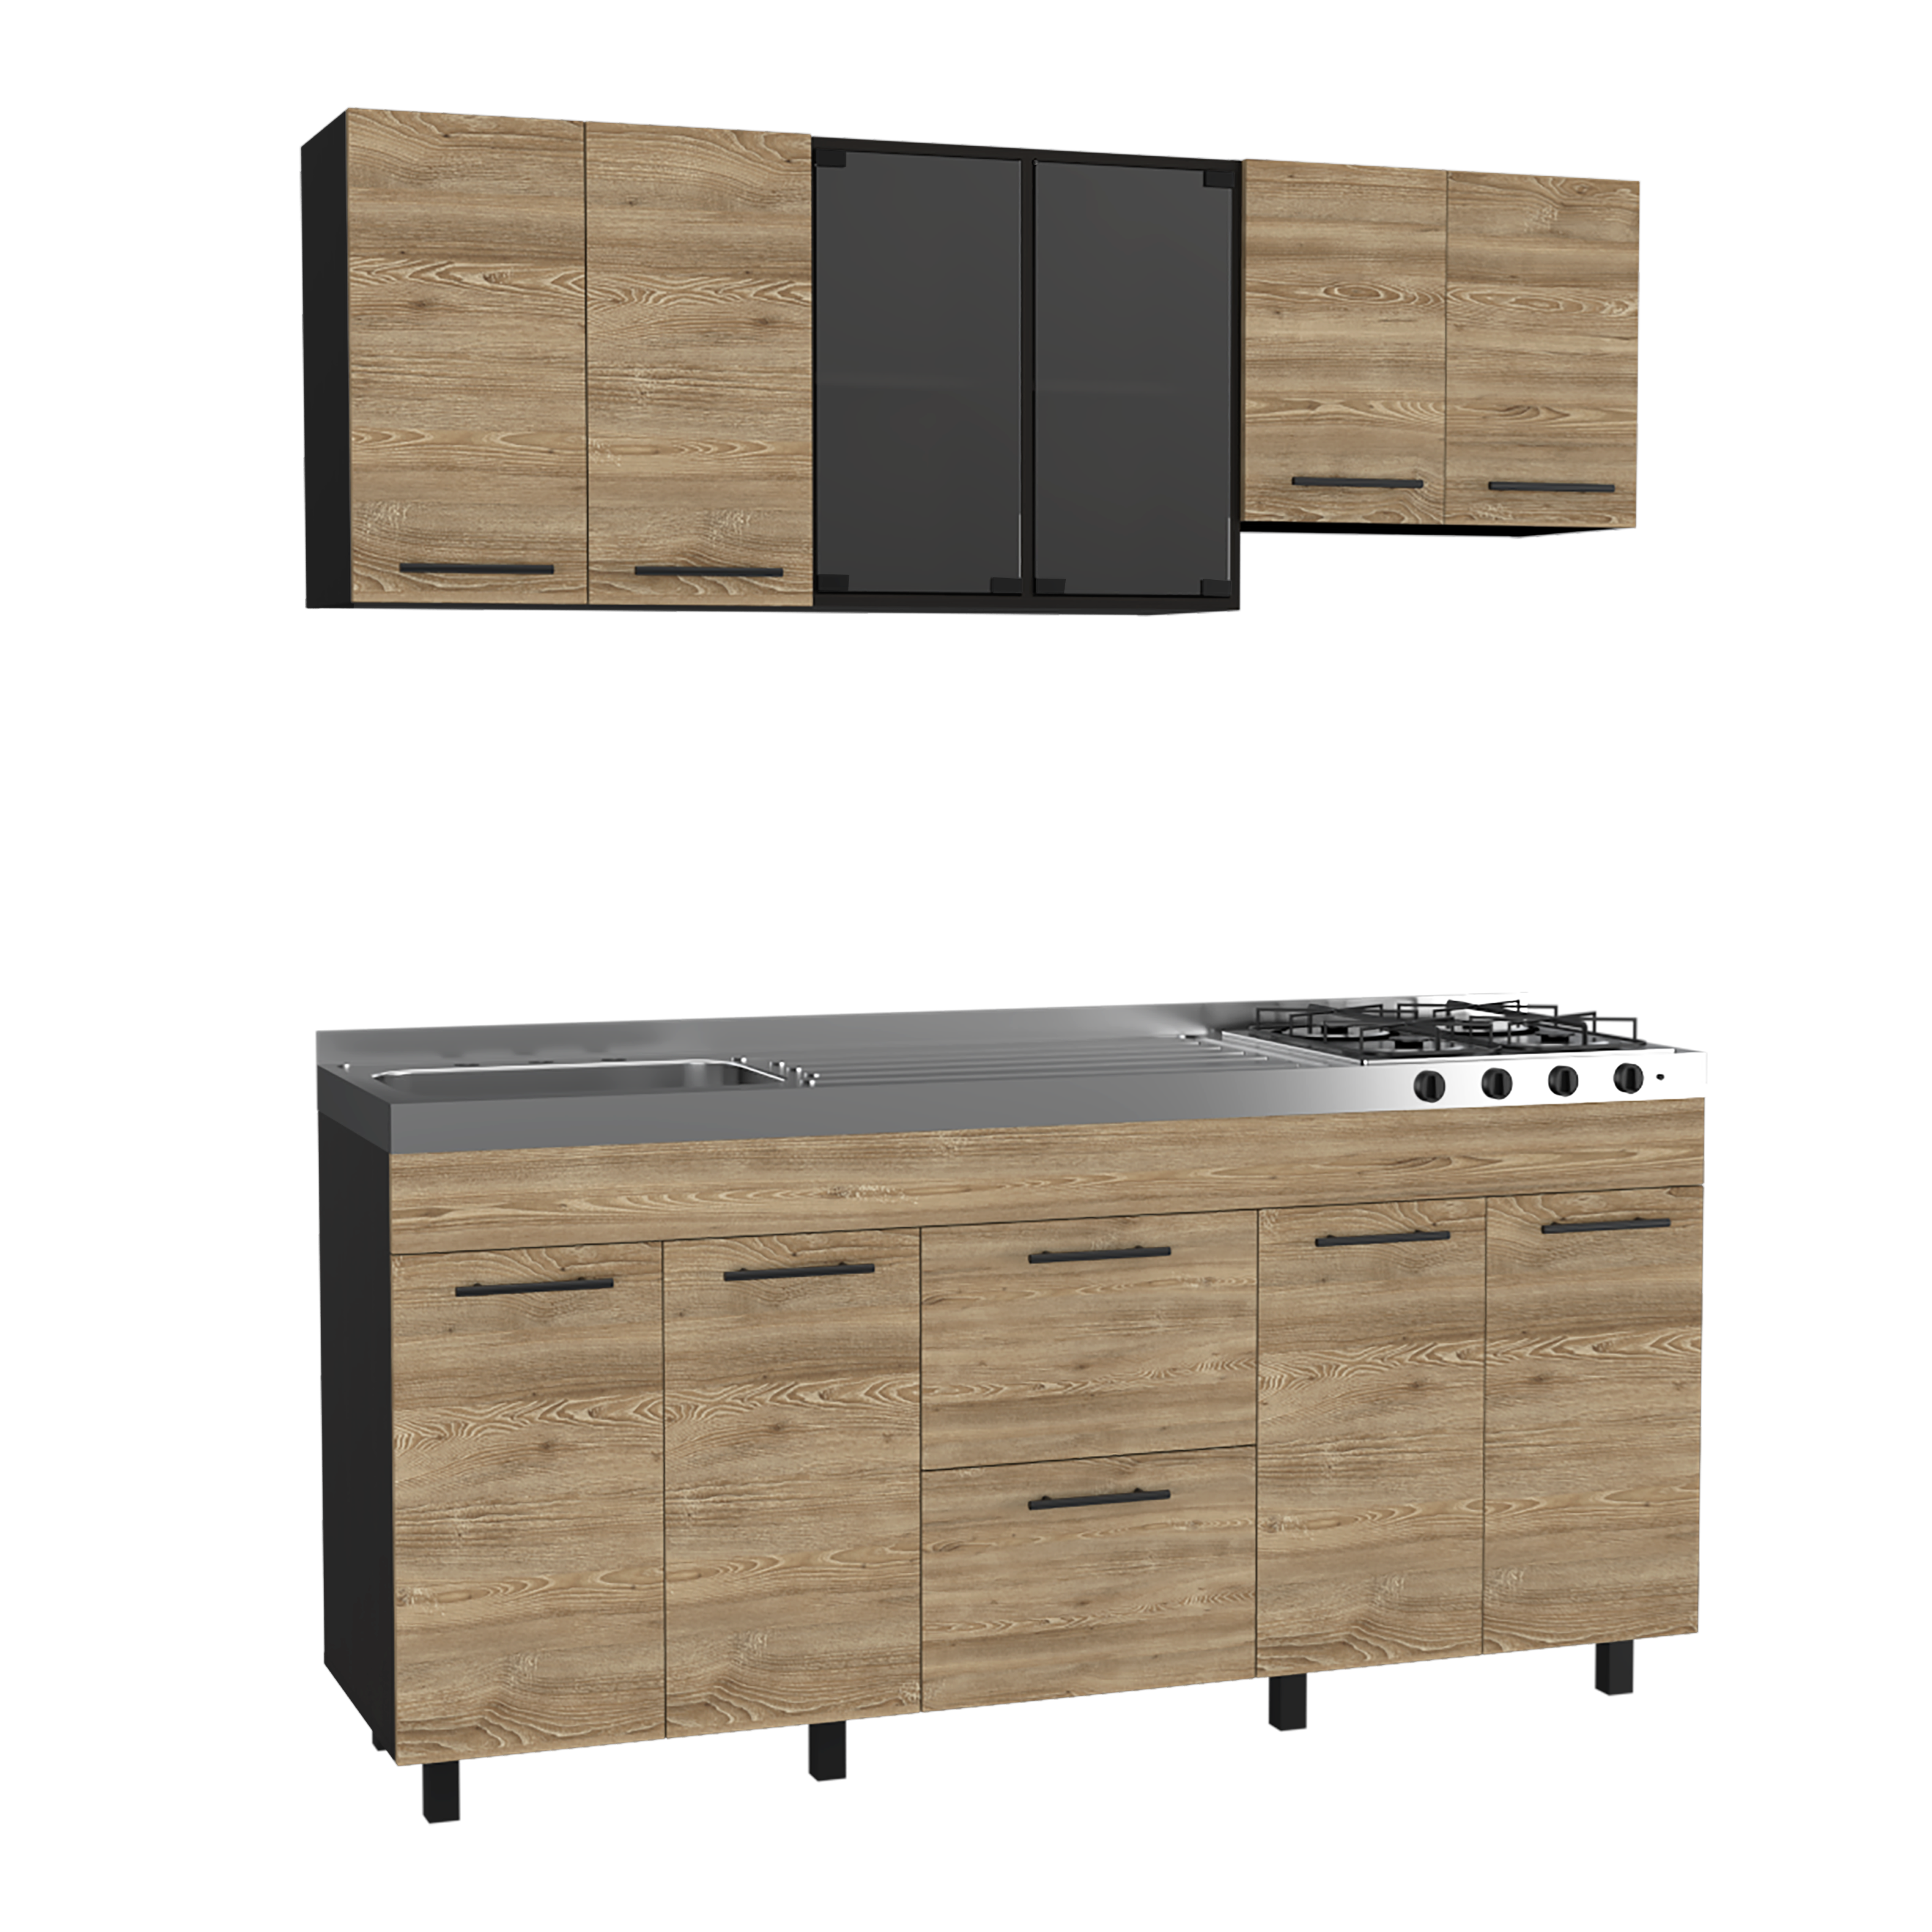 Luna Integral Kitchen, Includes Left Stainless Steel Countertop